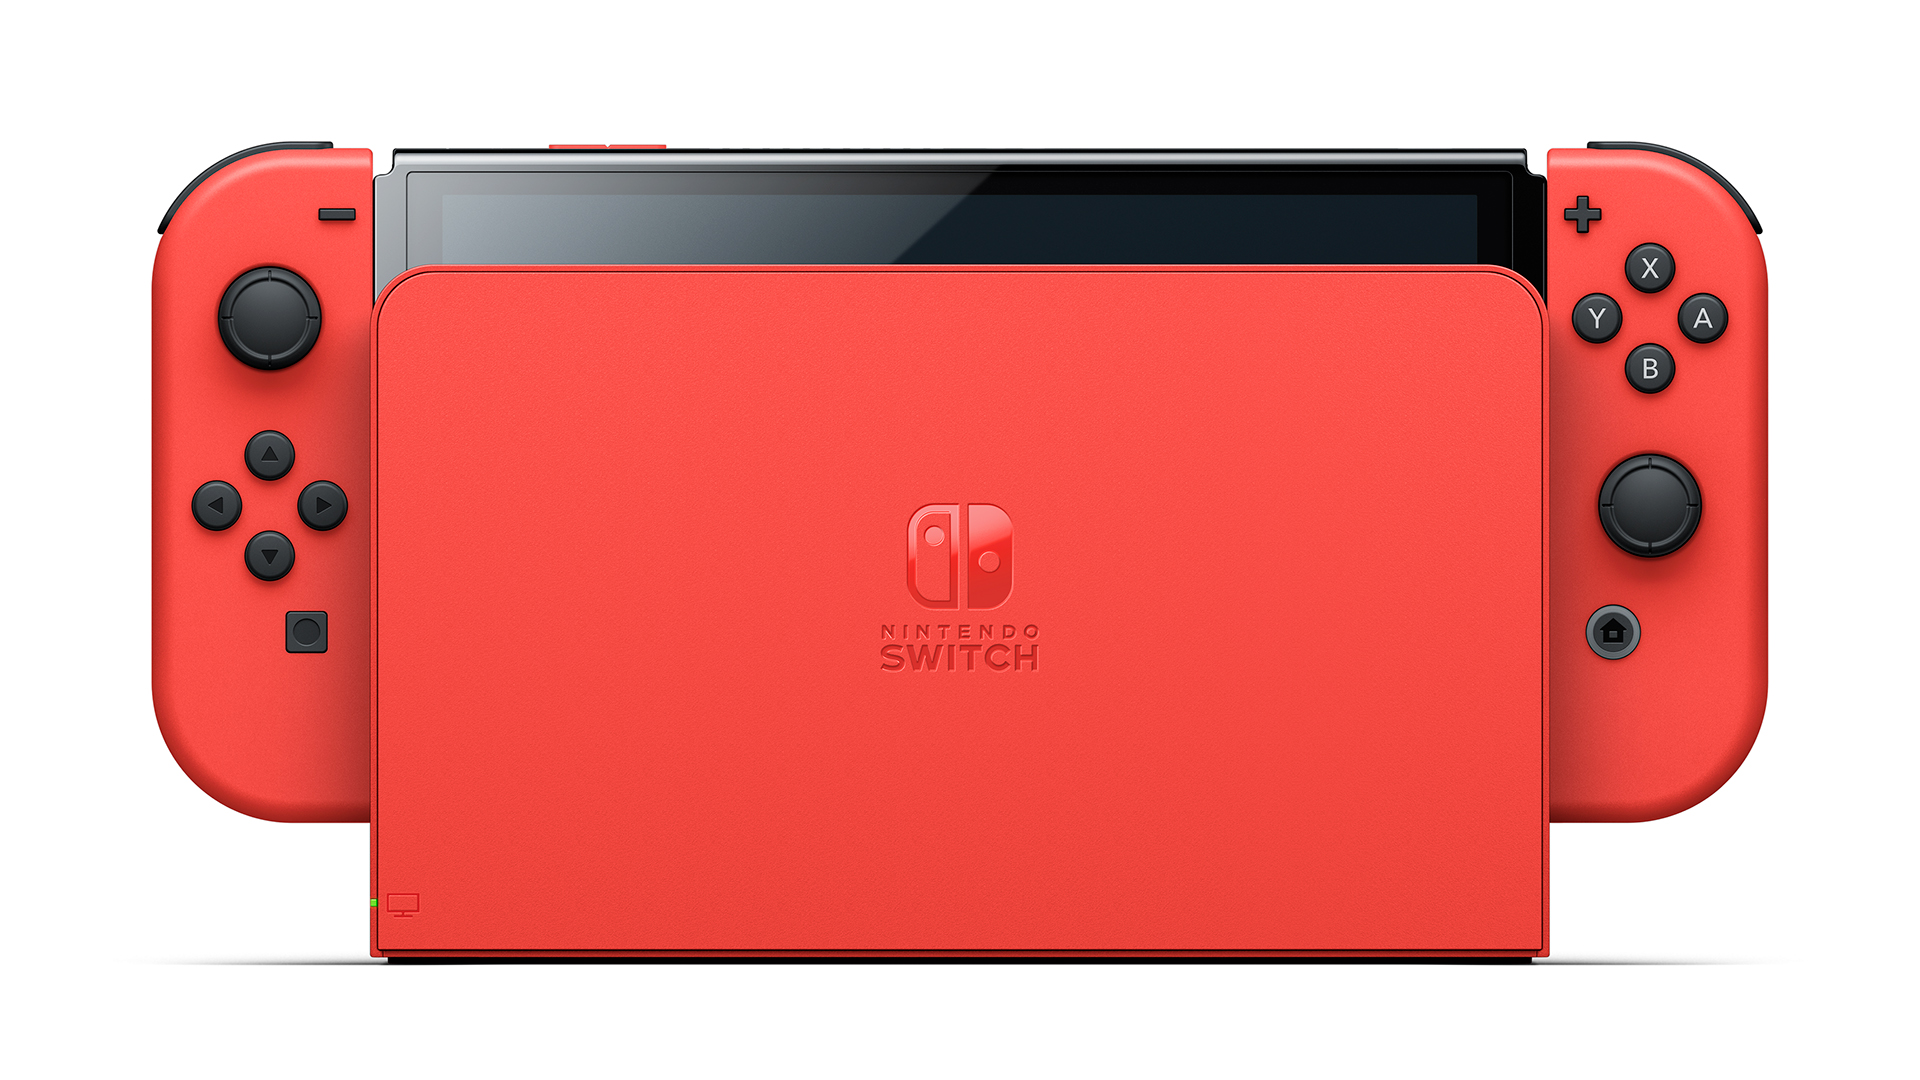 A photo of a (docked) Mario-themed Nintendo Switch from the front.